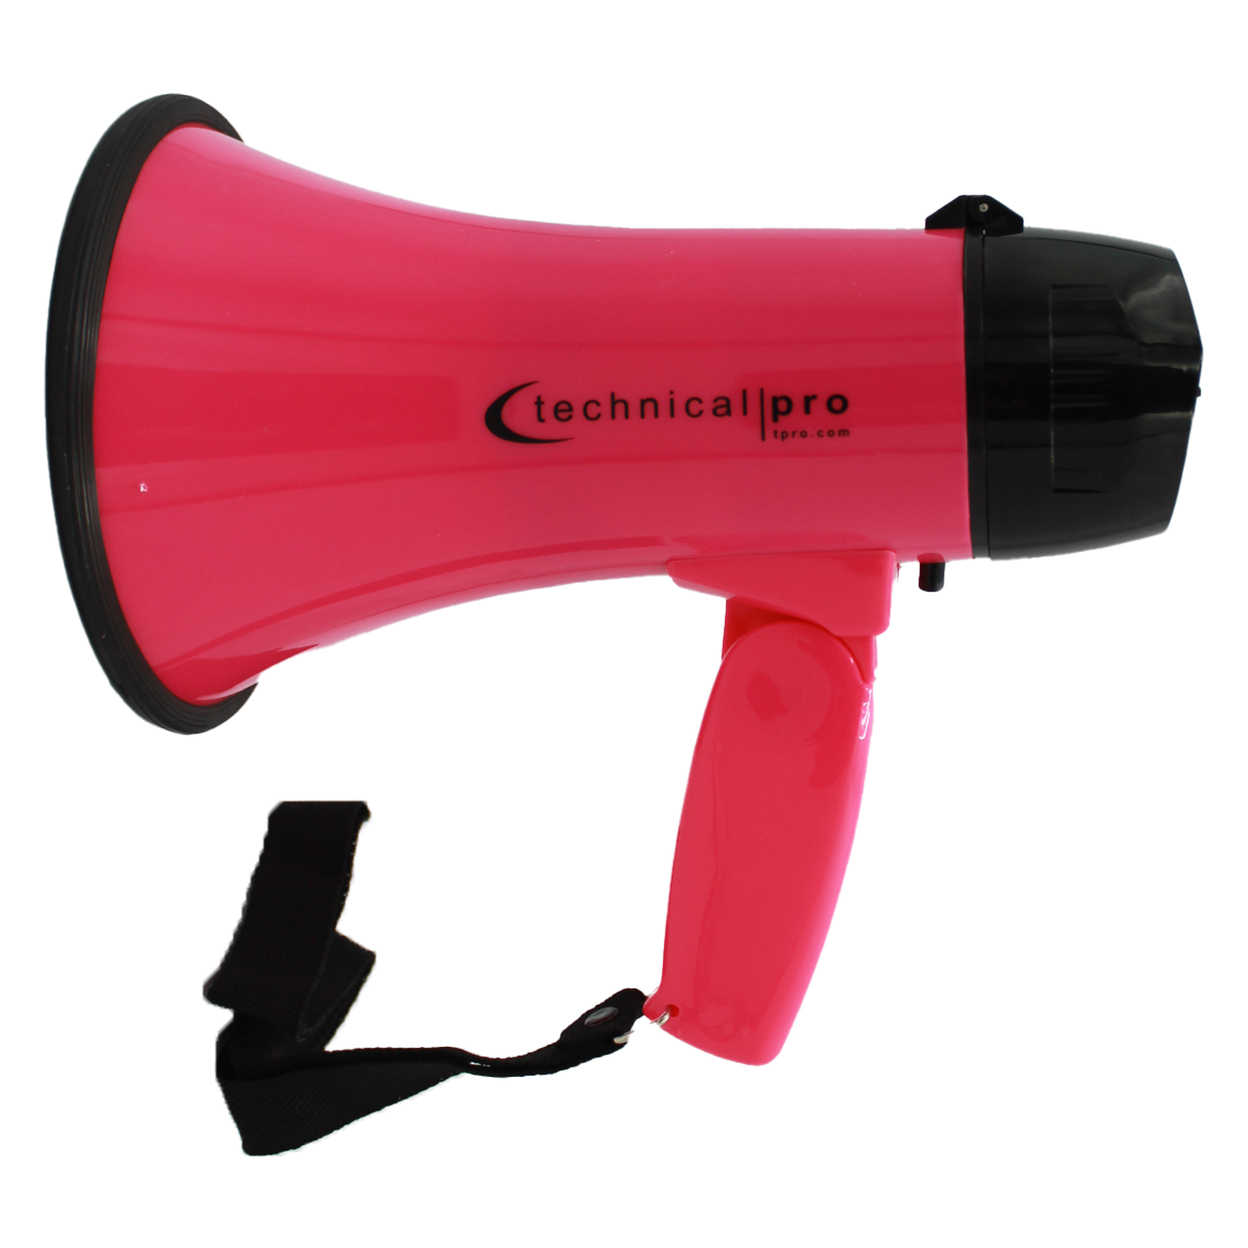 Technical Pro Lightweight Portable 20 Watts Pink And Black 300M Range Megaphone Bullhorn With Strap, Siren, And Volume Control